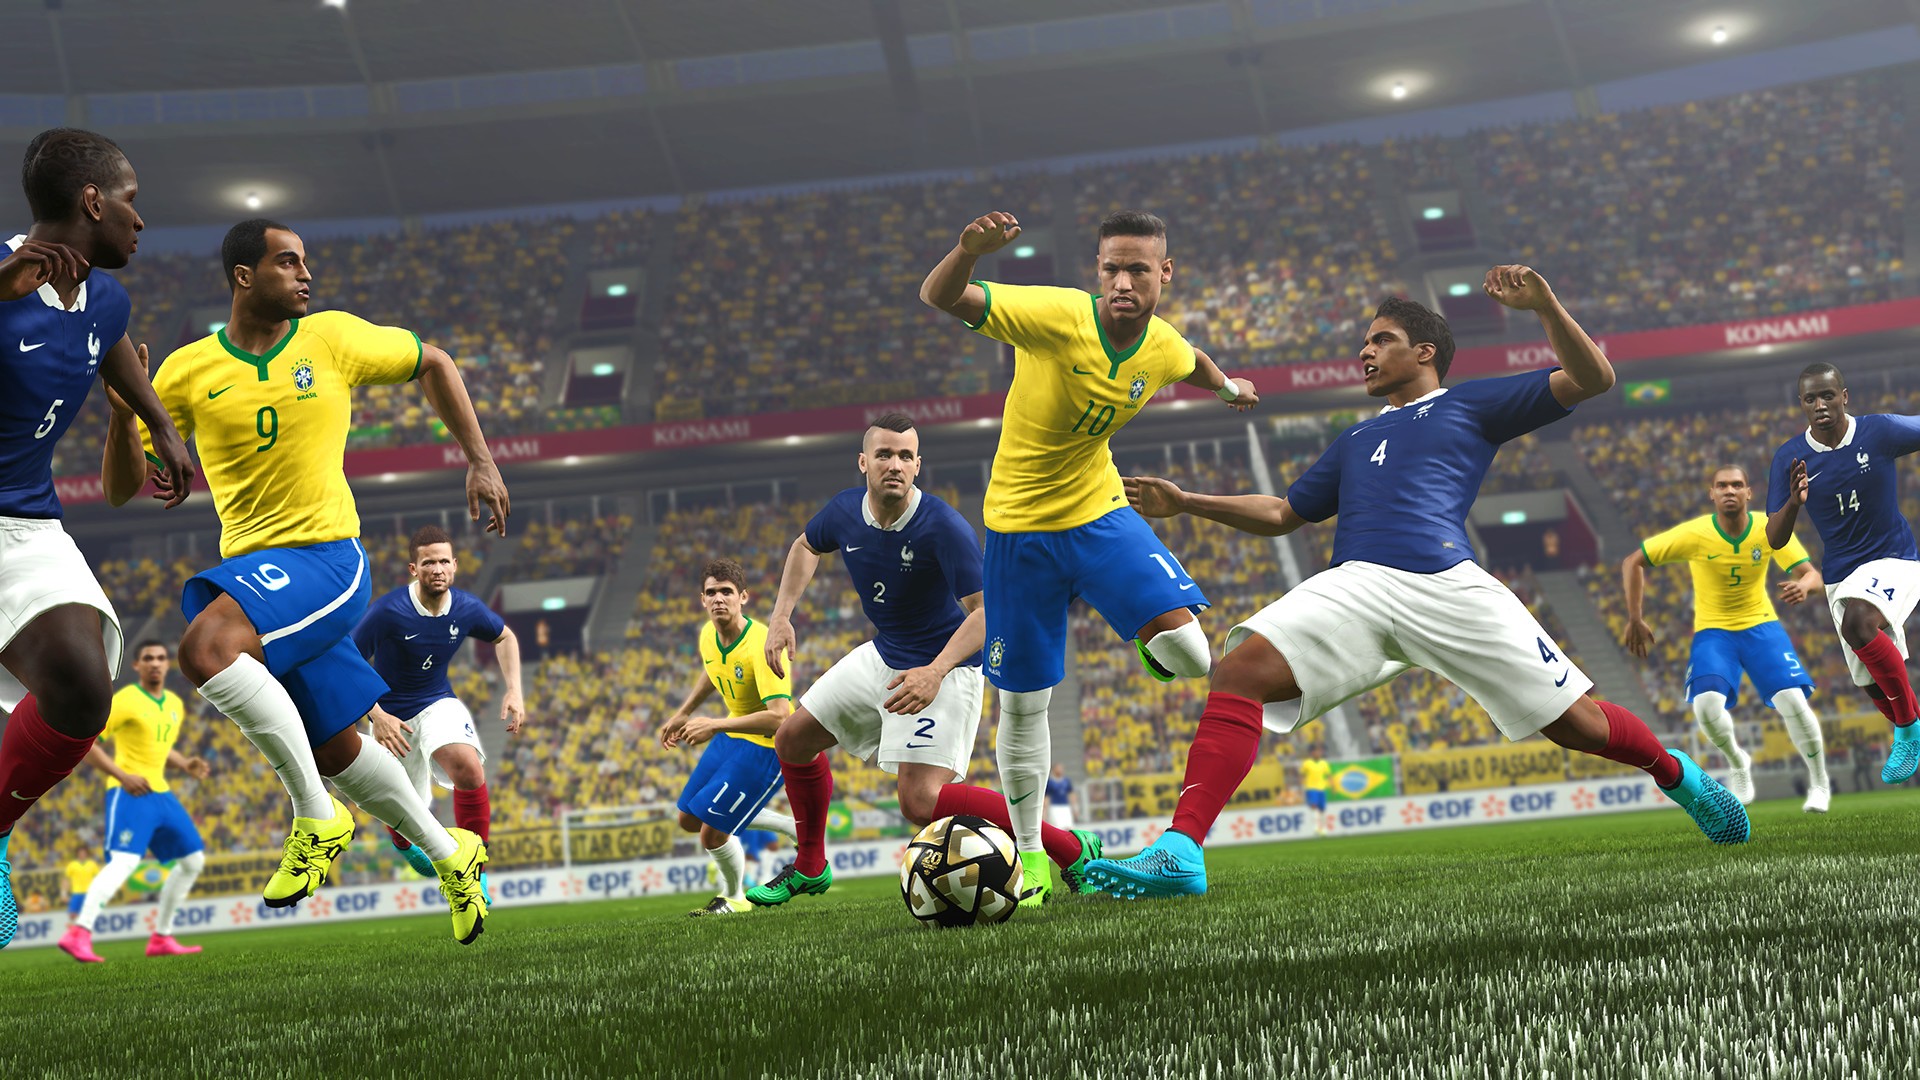 PES 2016 PC System Requirements Are Official, Quite Decent